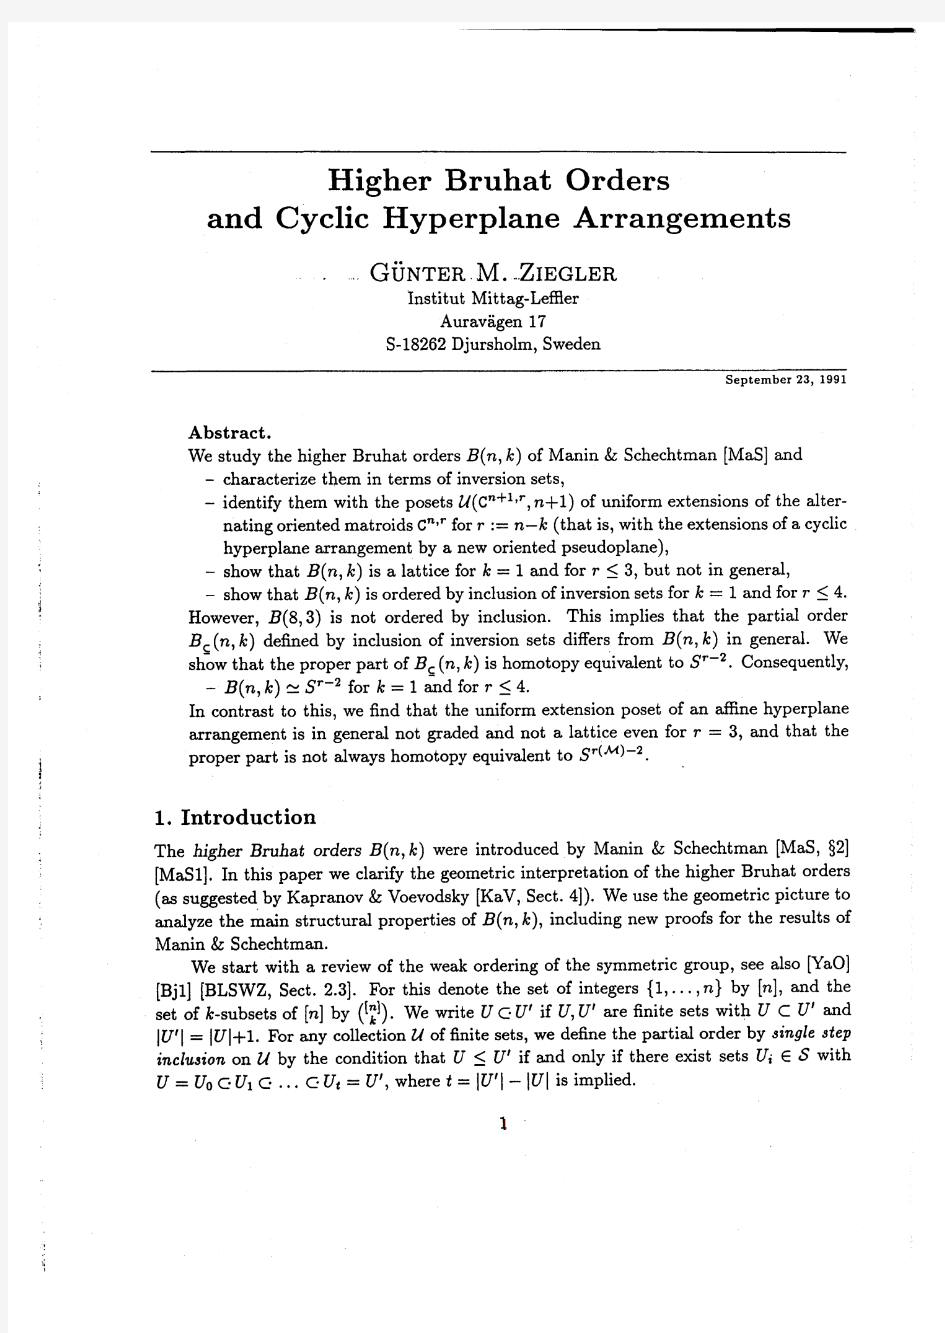 Higher Bruhat orders and cyclic hyperplane arrangements, Topology 32